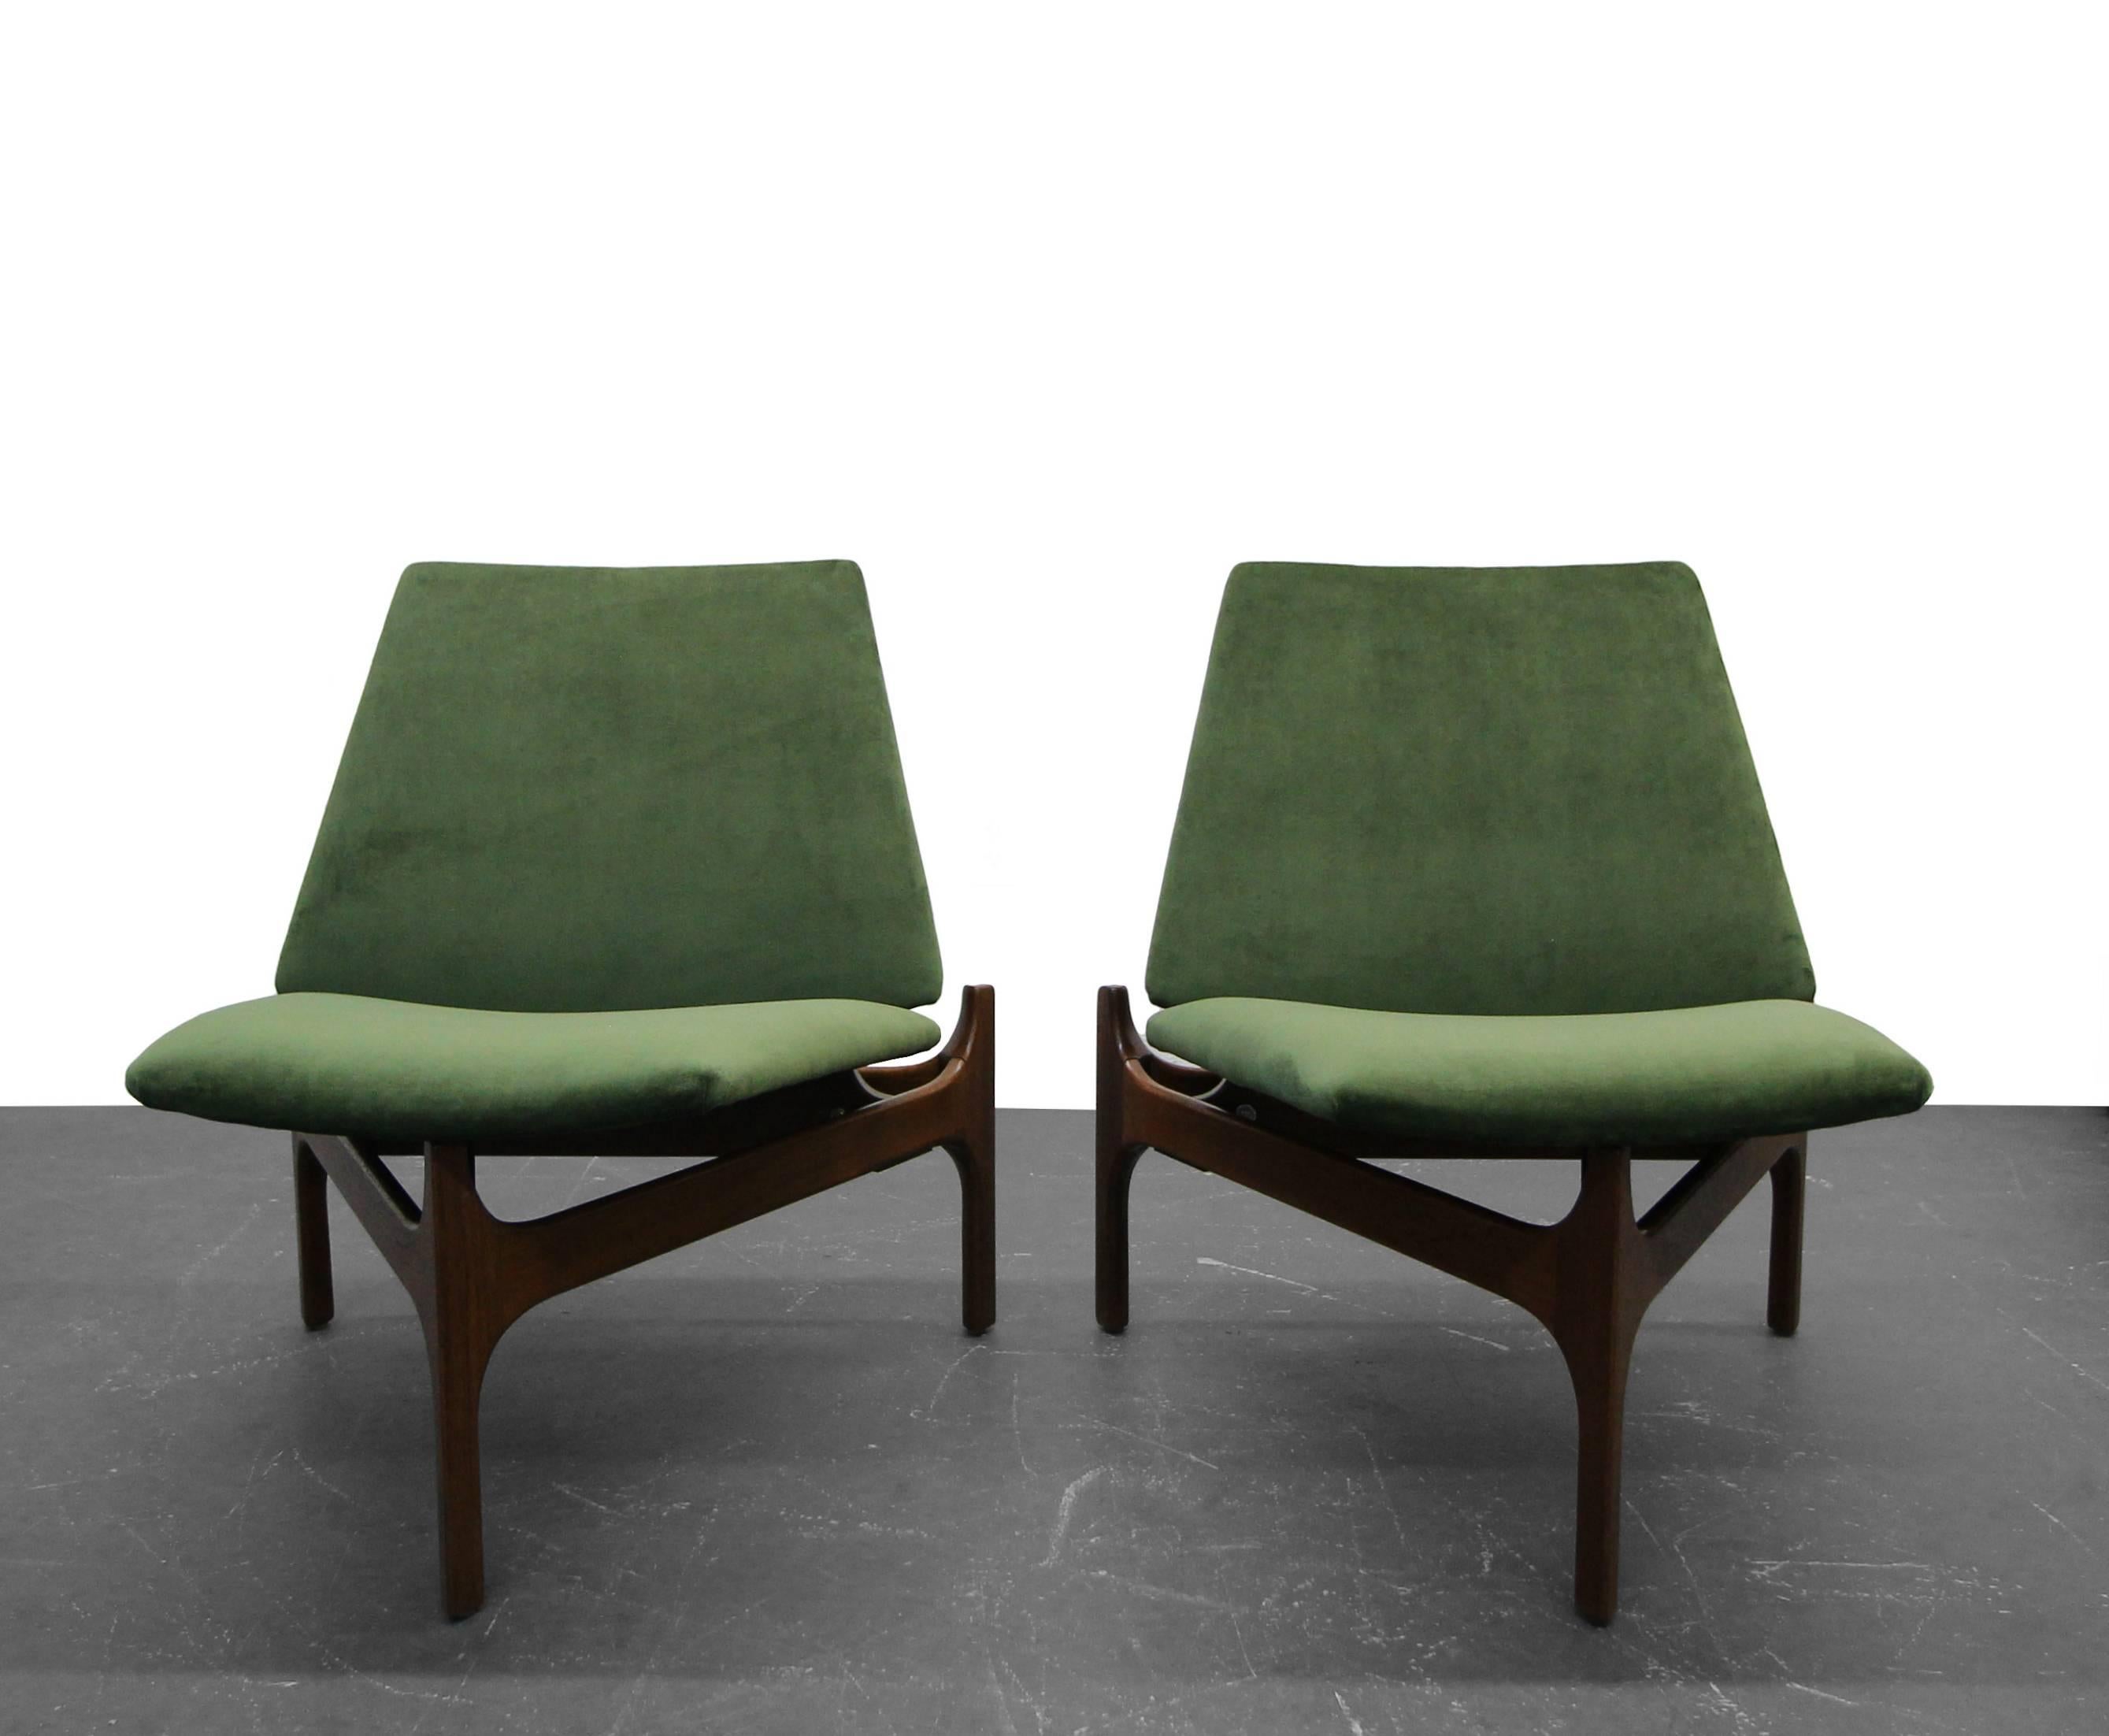 Stunning pair of sculpted side chairs by John Caldwell for Brown Saltman. Very unique pair of midcentury chairs with beautiful lines and solid walnut frames.

Professionally reupholstered in a beautiful green micro velvet.